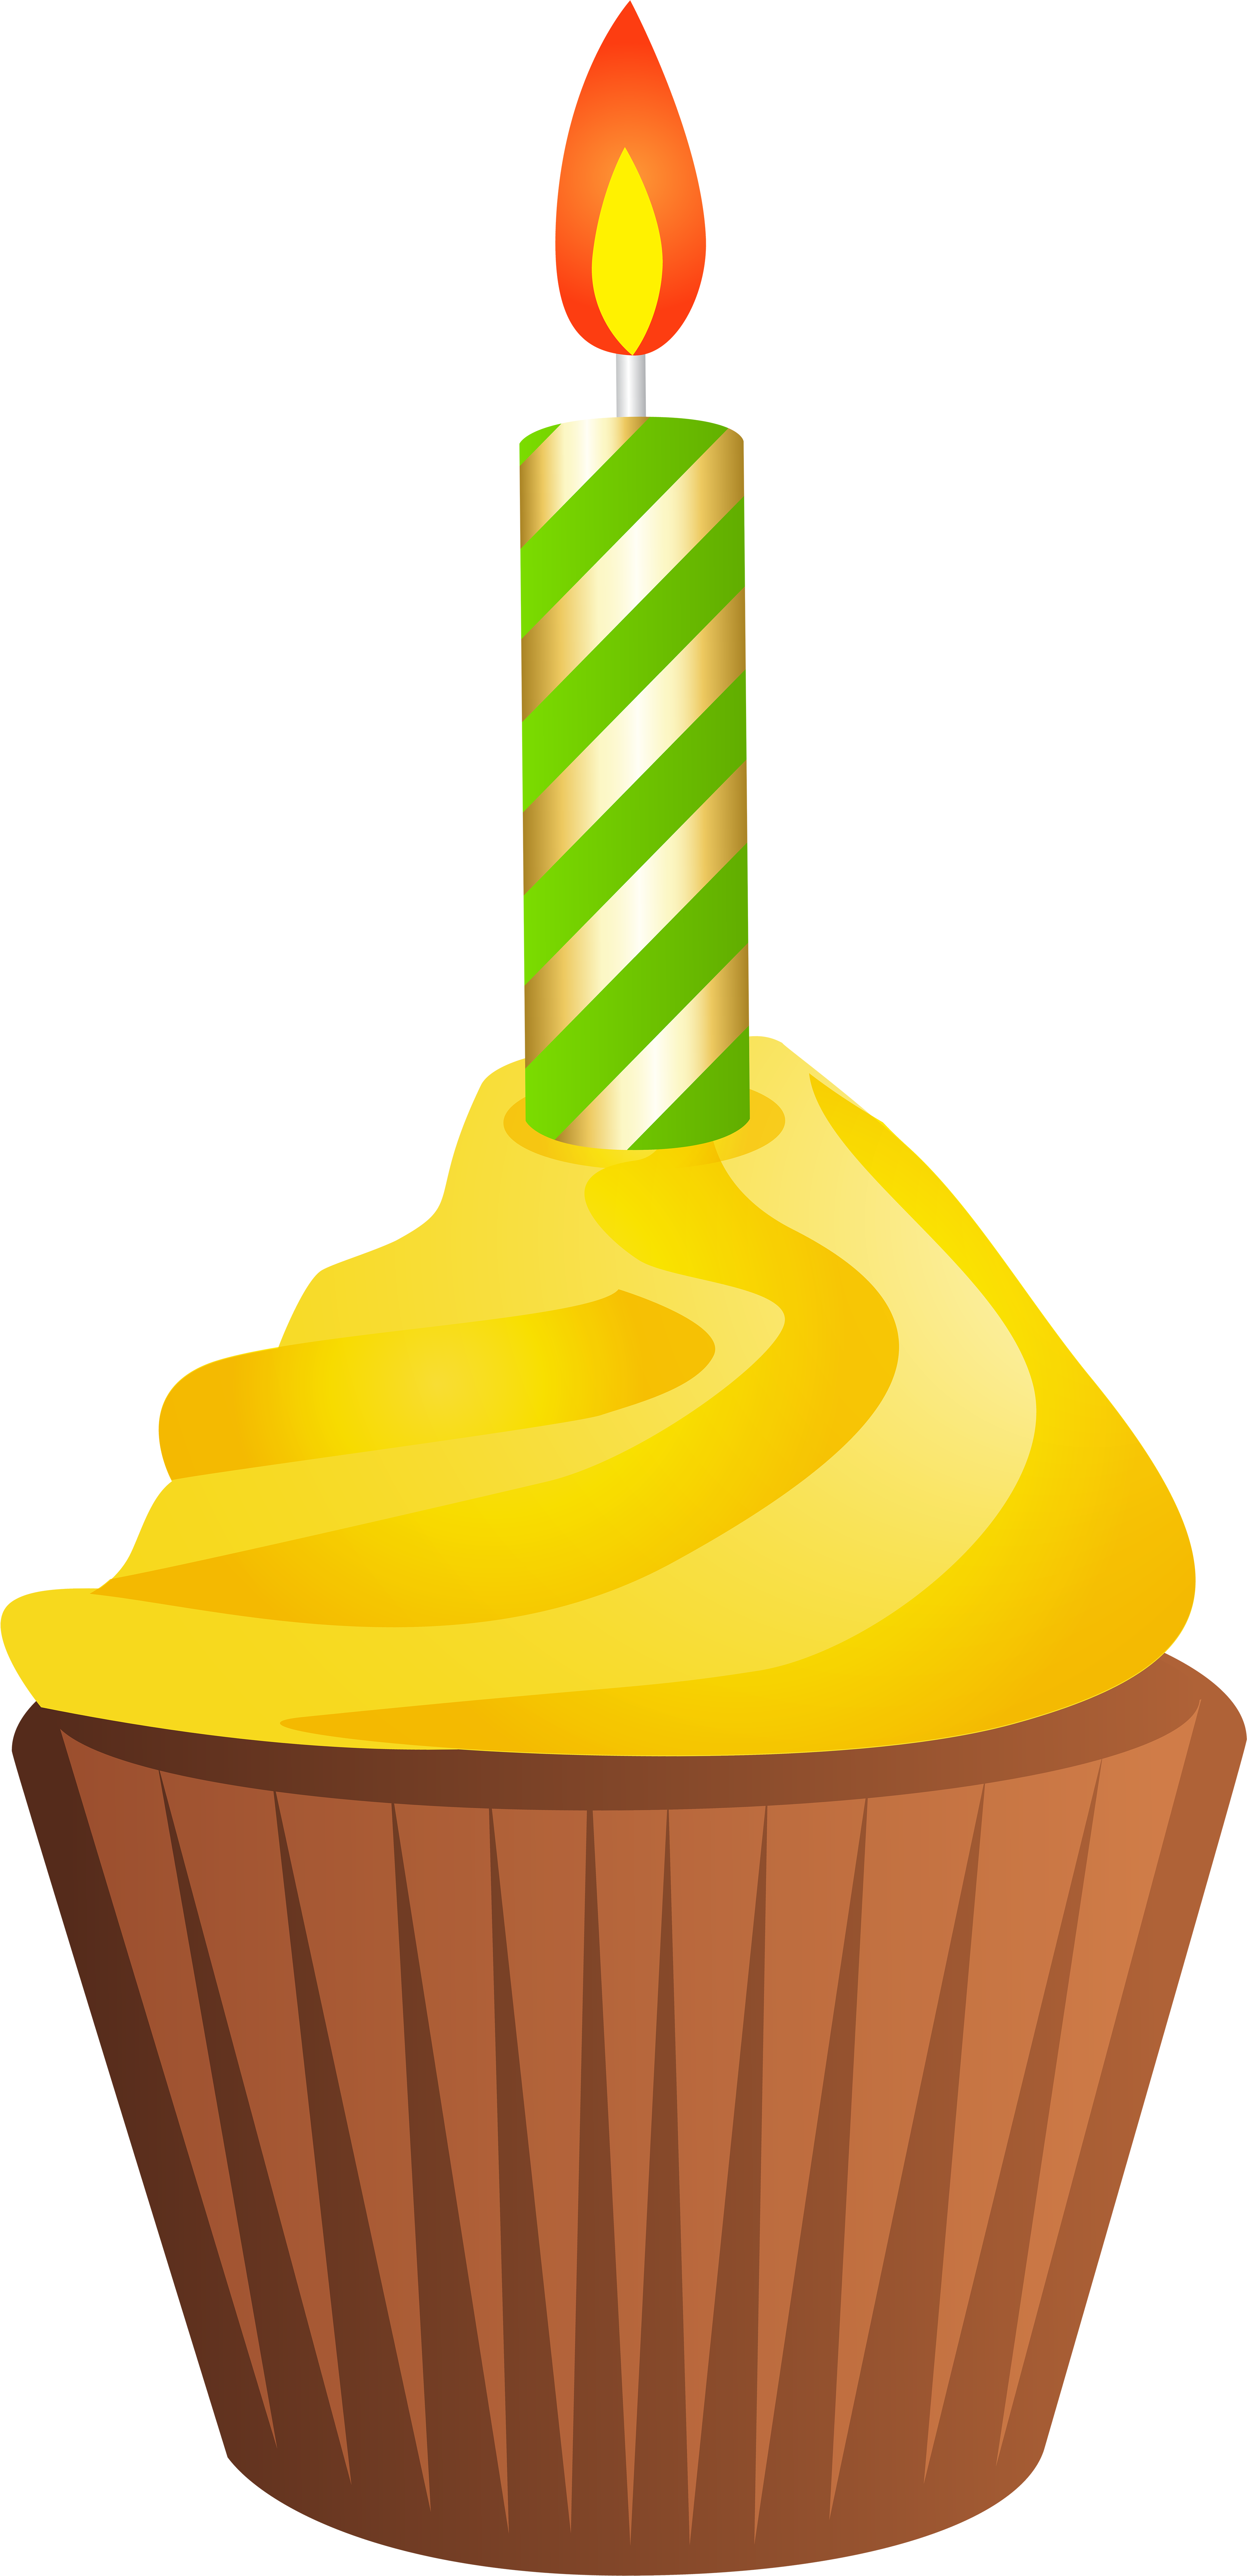 Birthday Muffin With Candle Png Clip Art Imageu200b